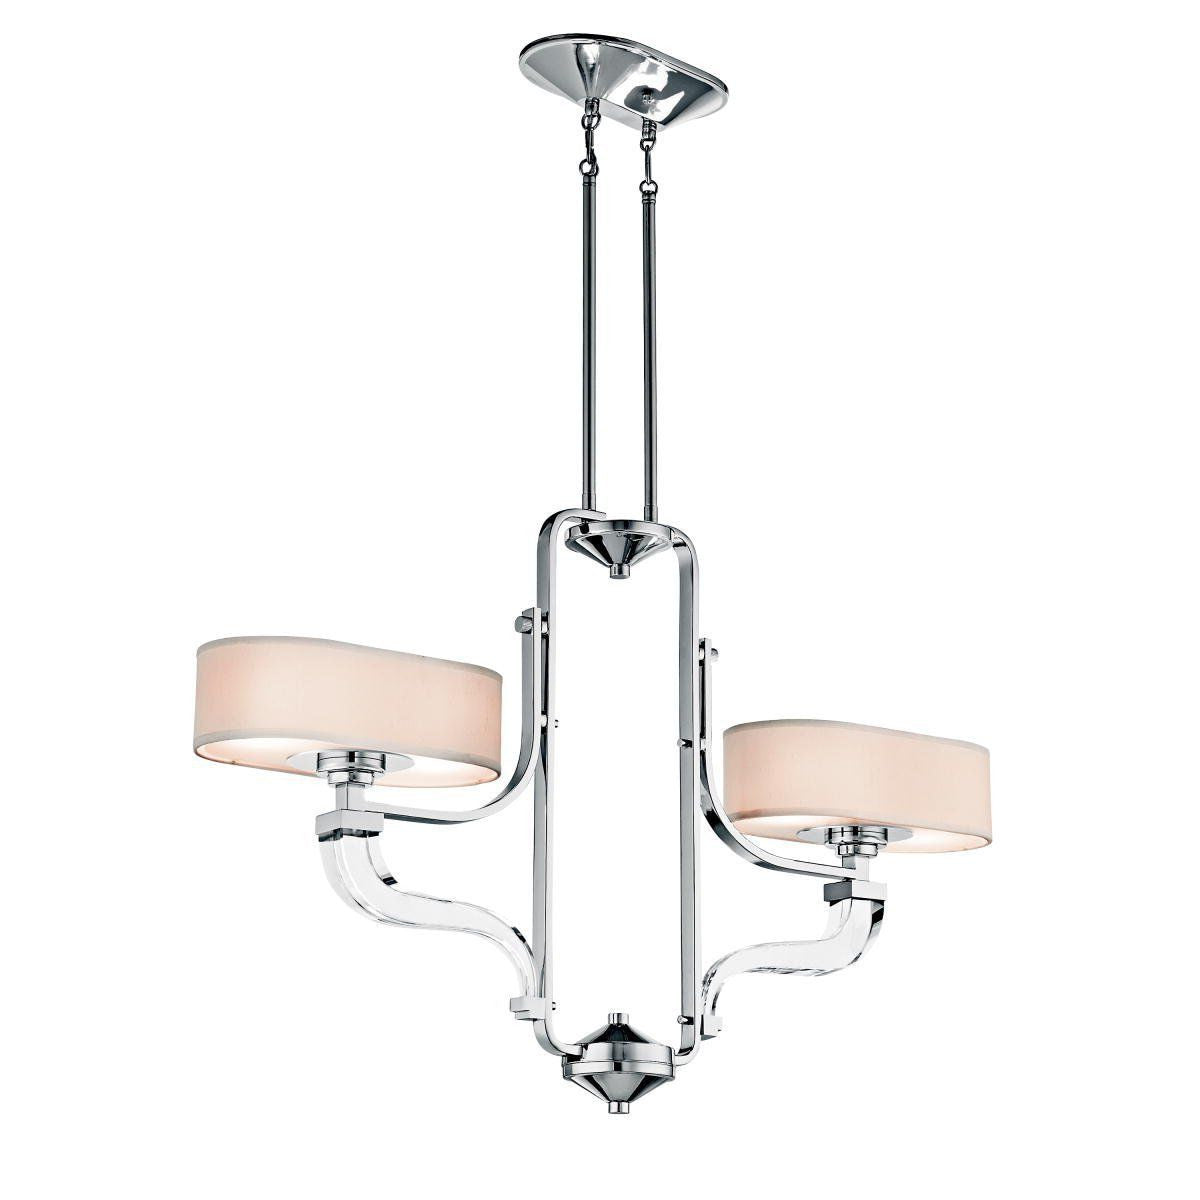 Aztec 34663 by Kichler Lighting Four Light Point Claire Hanging Island Chandelier in Chrome Finish